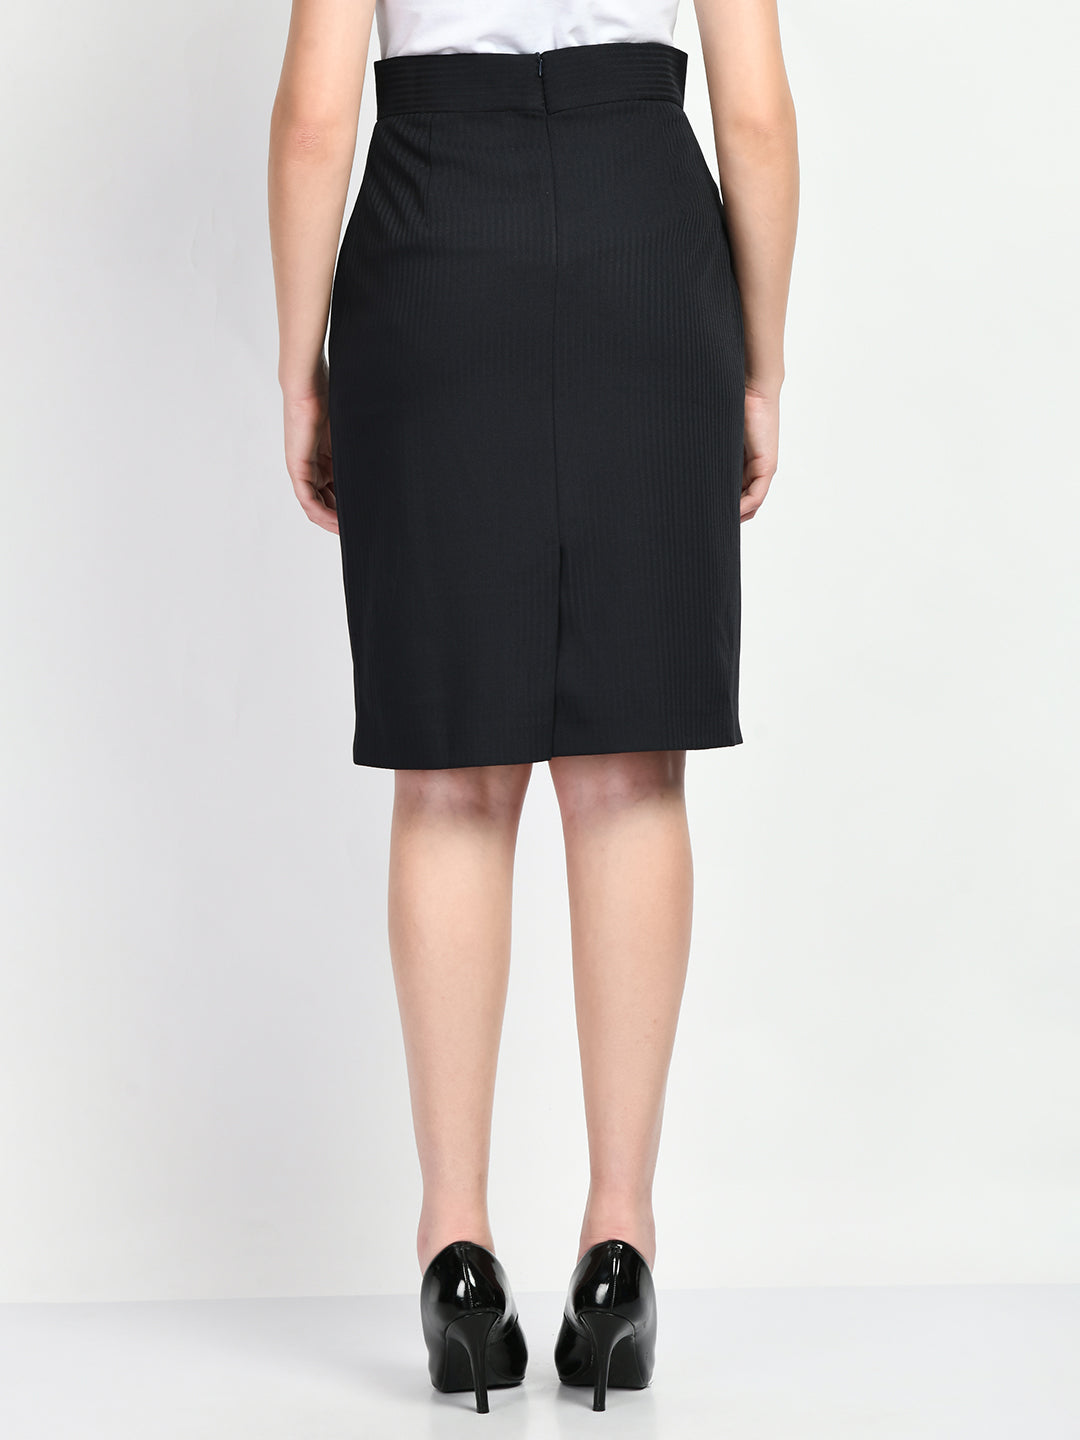 Exude Humility Striped Pencil Skirt (Black)